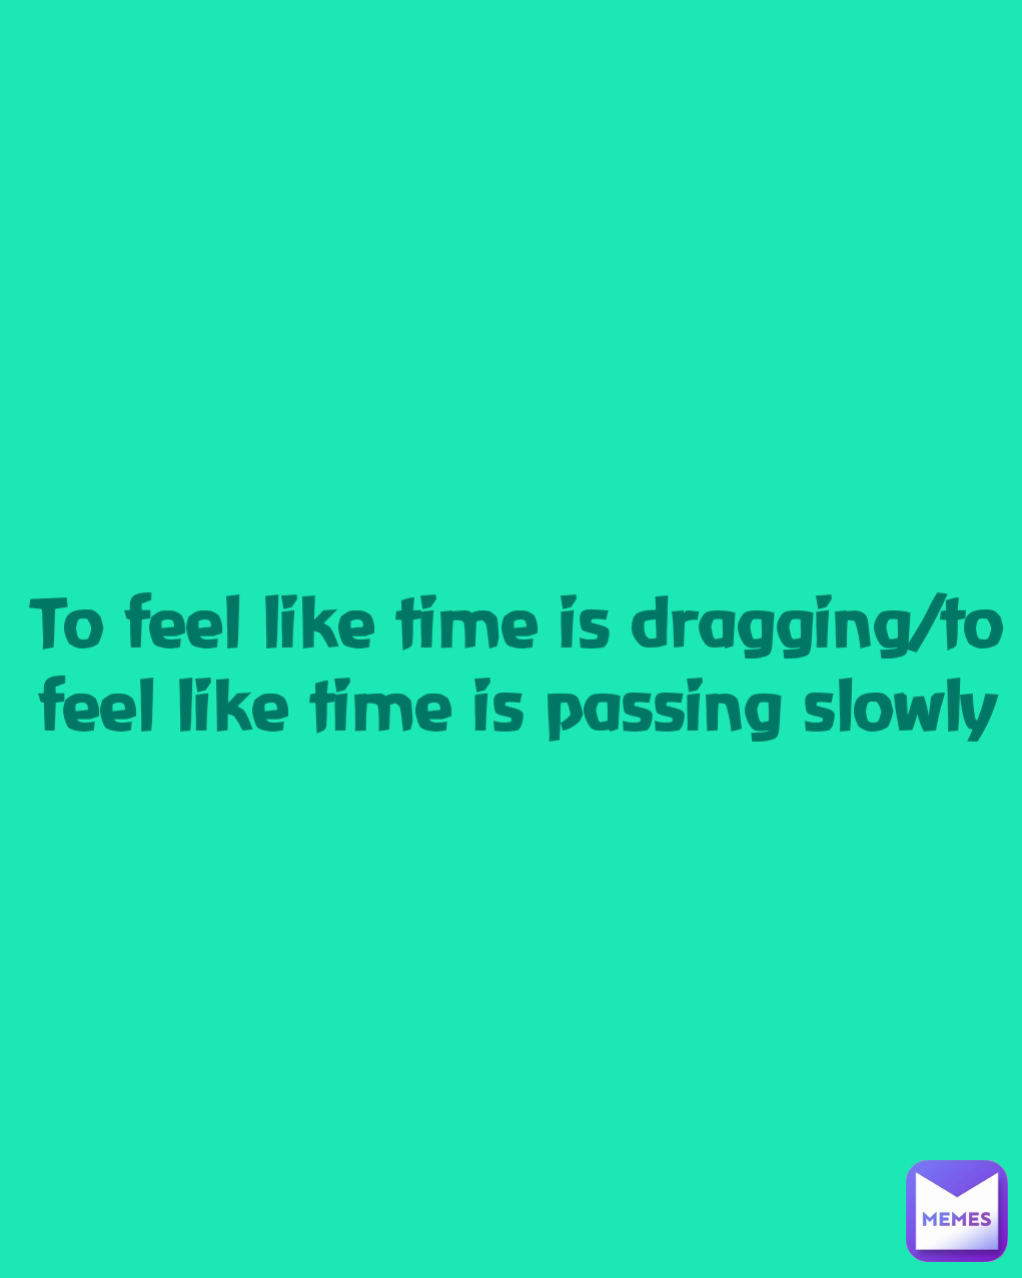 To feel like time is dragging/to feel like time is passing slowly